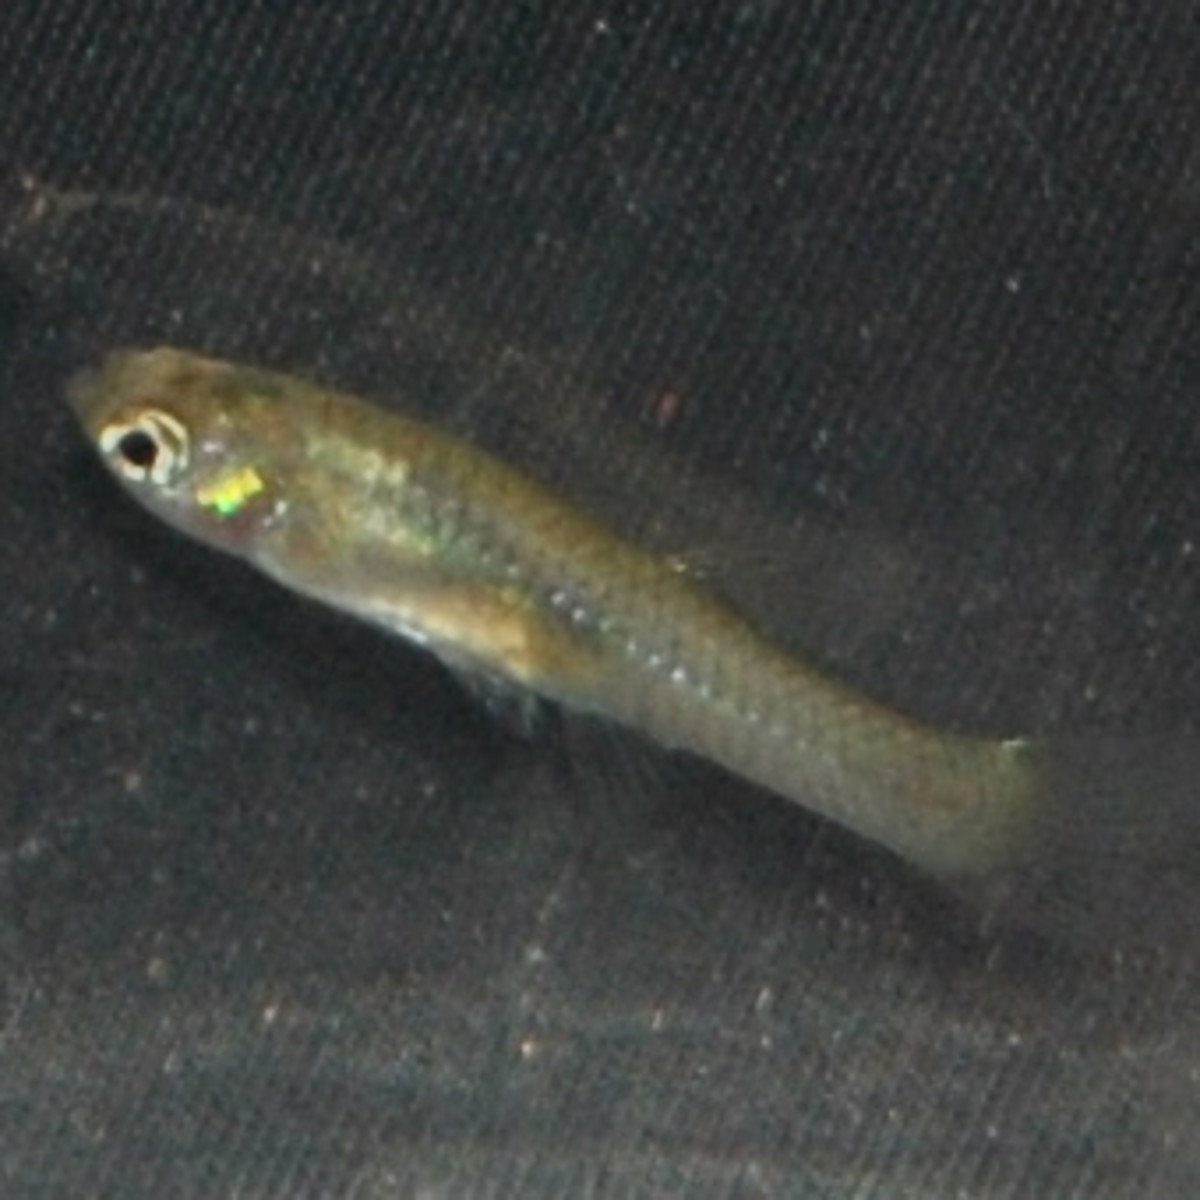 A female Endler showing signs of wasting away disease.